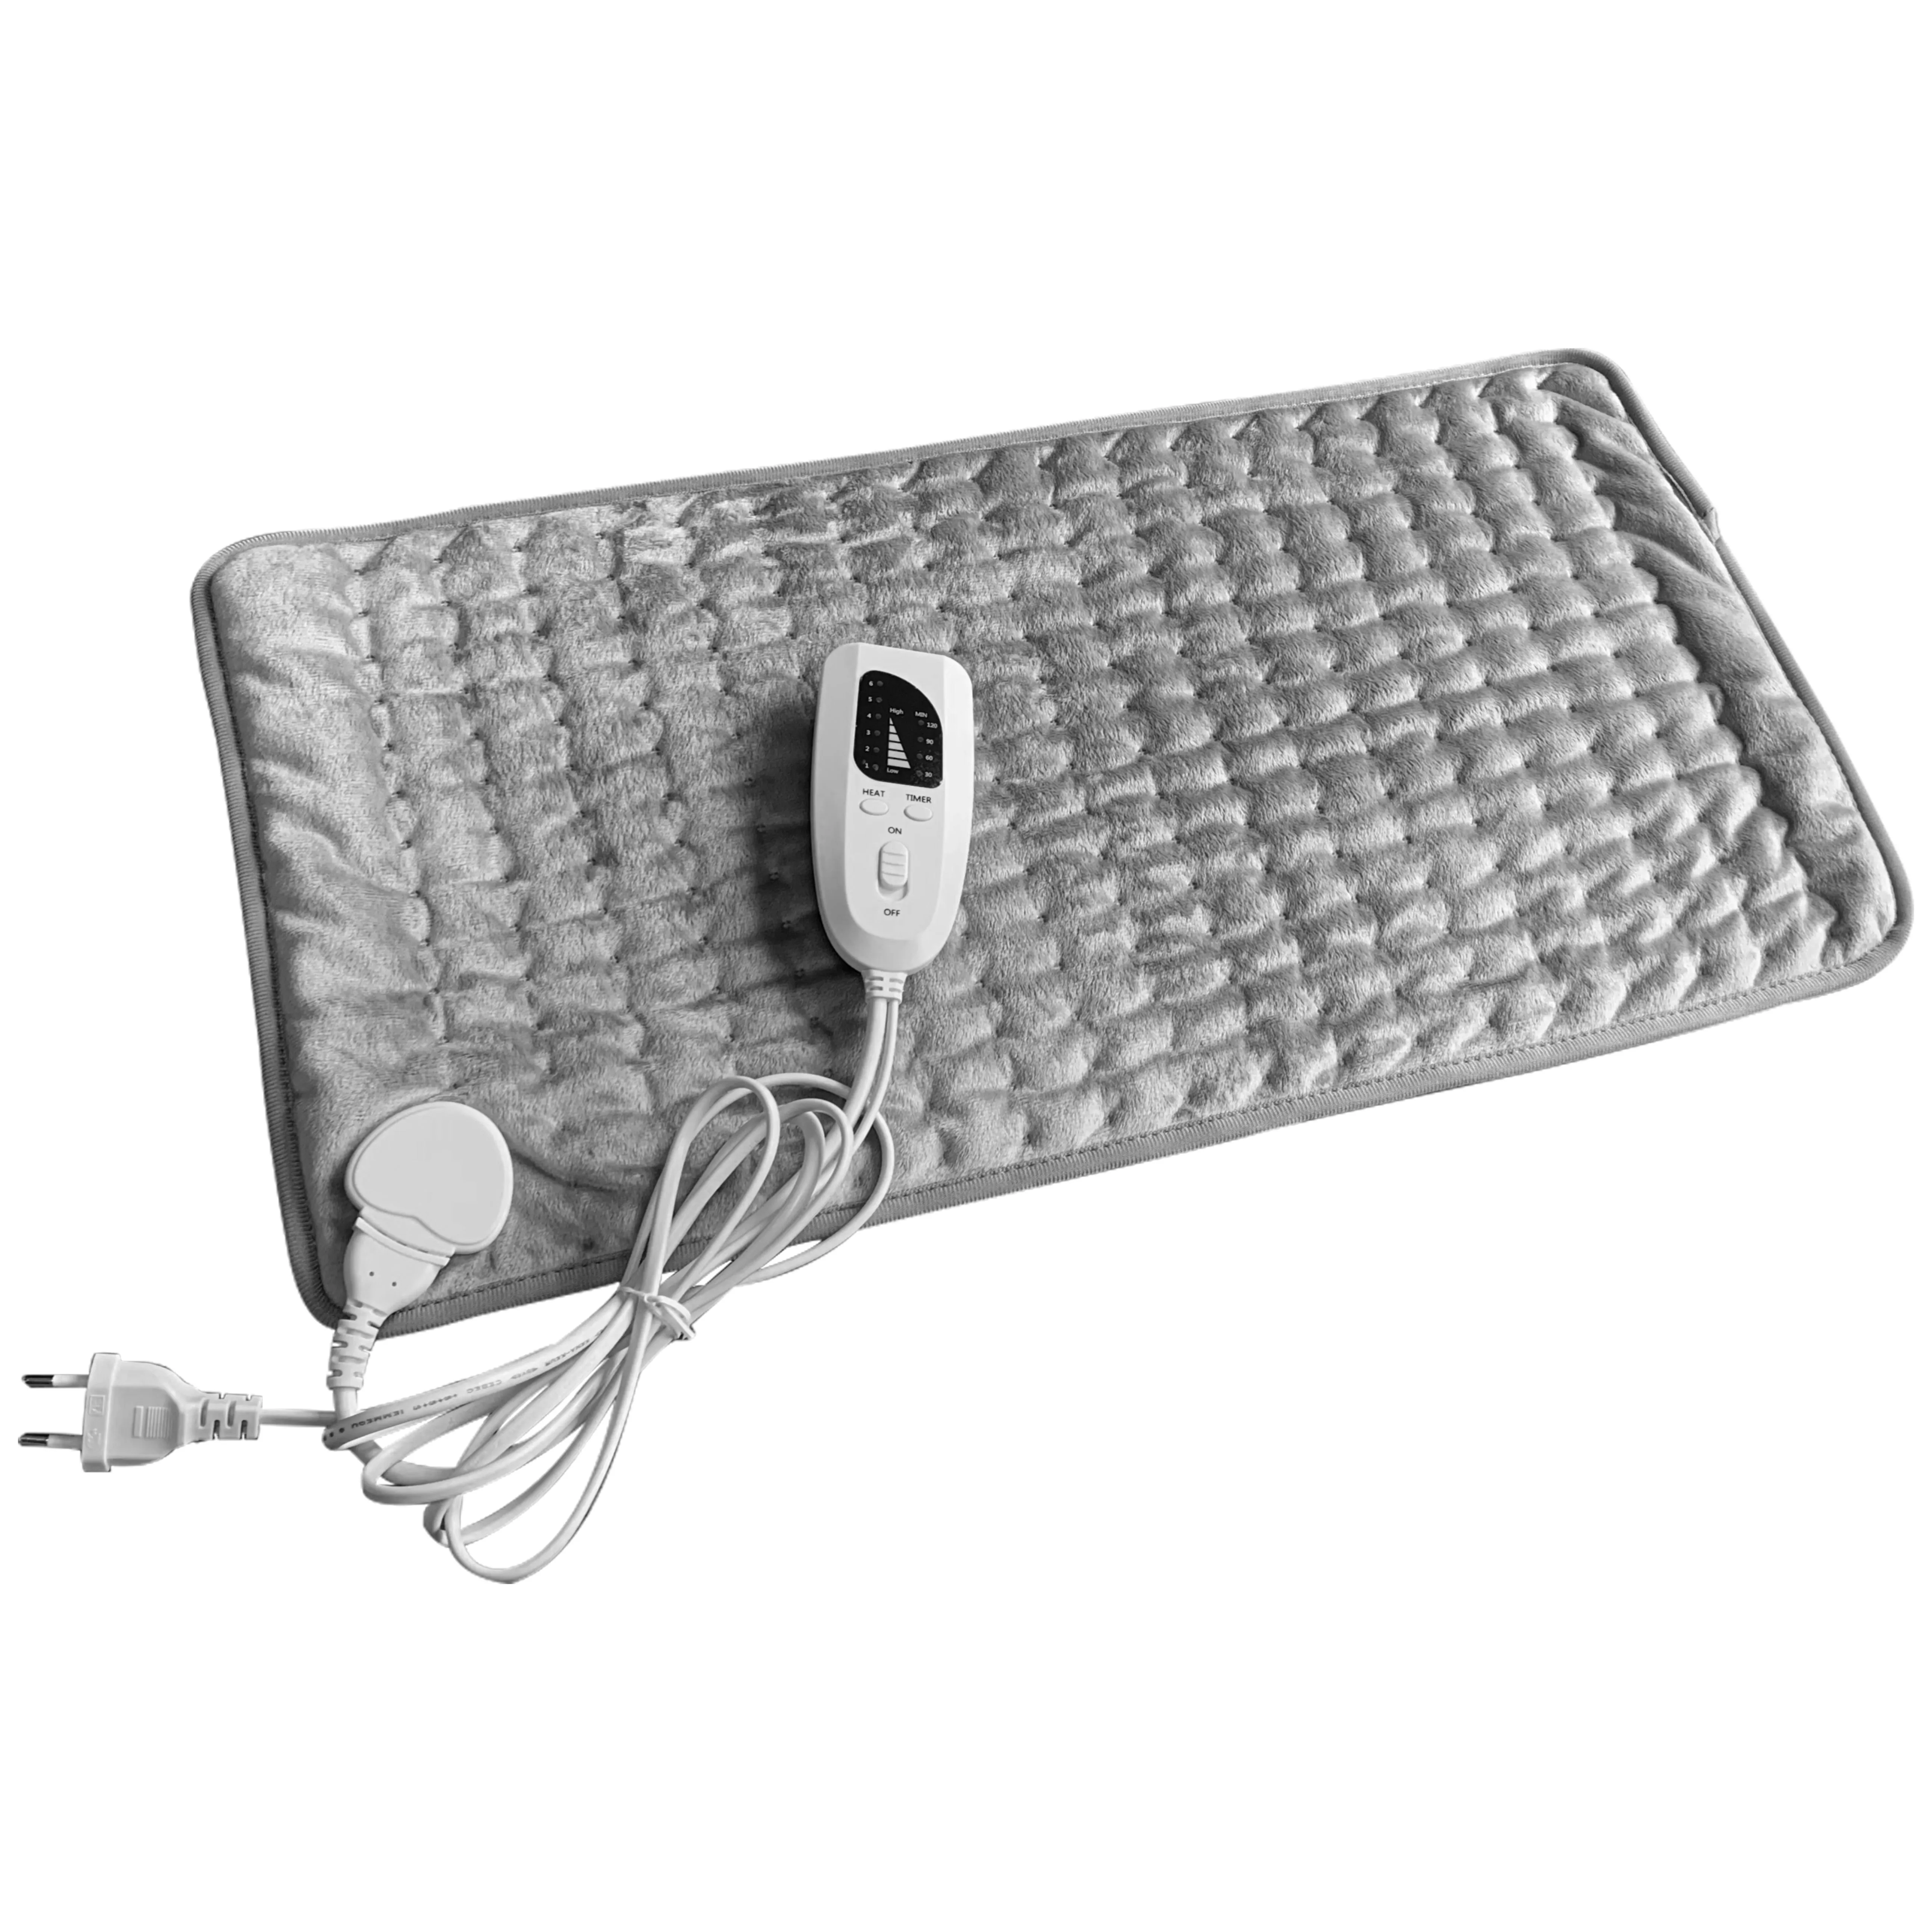 XL King Size electric Back Shoulder Heating therapy Pad (Charcoal Gray) - Fast-Heating Machine-Washable Pad